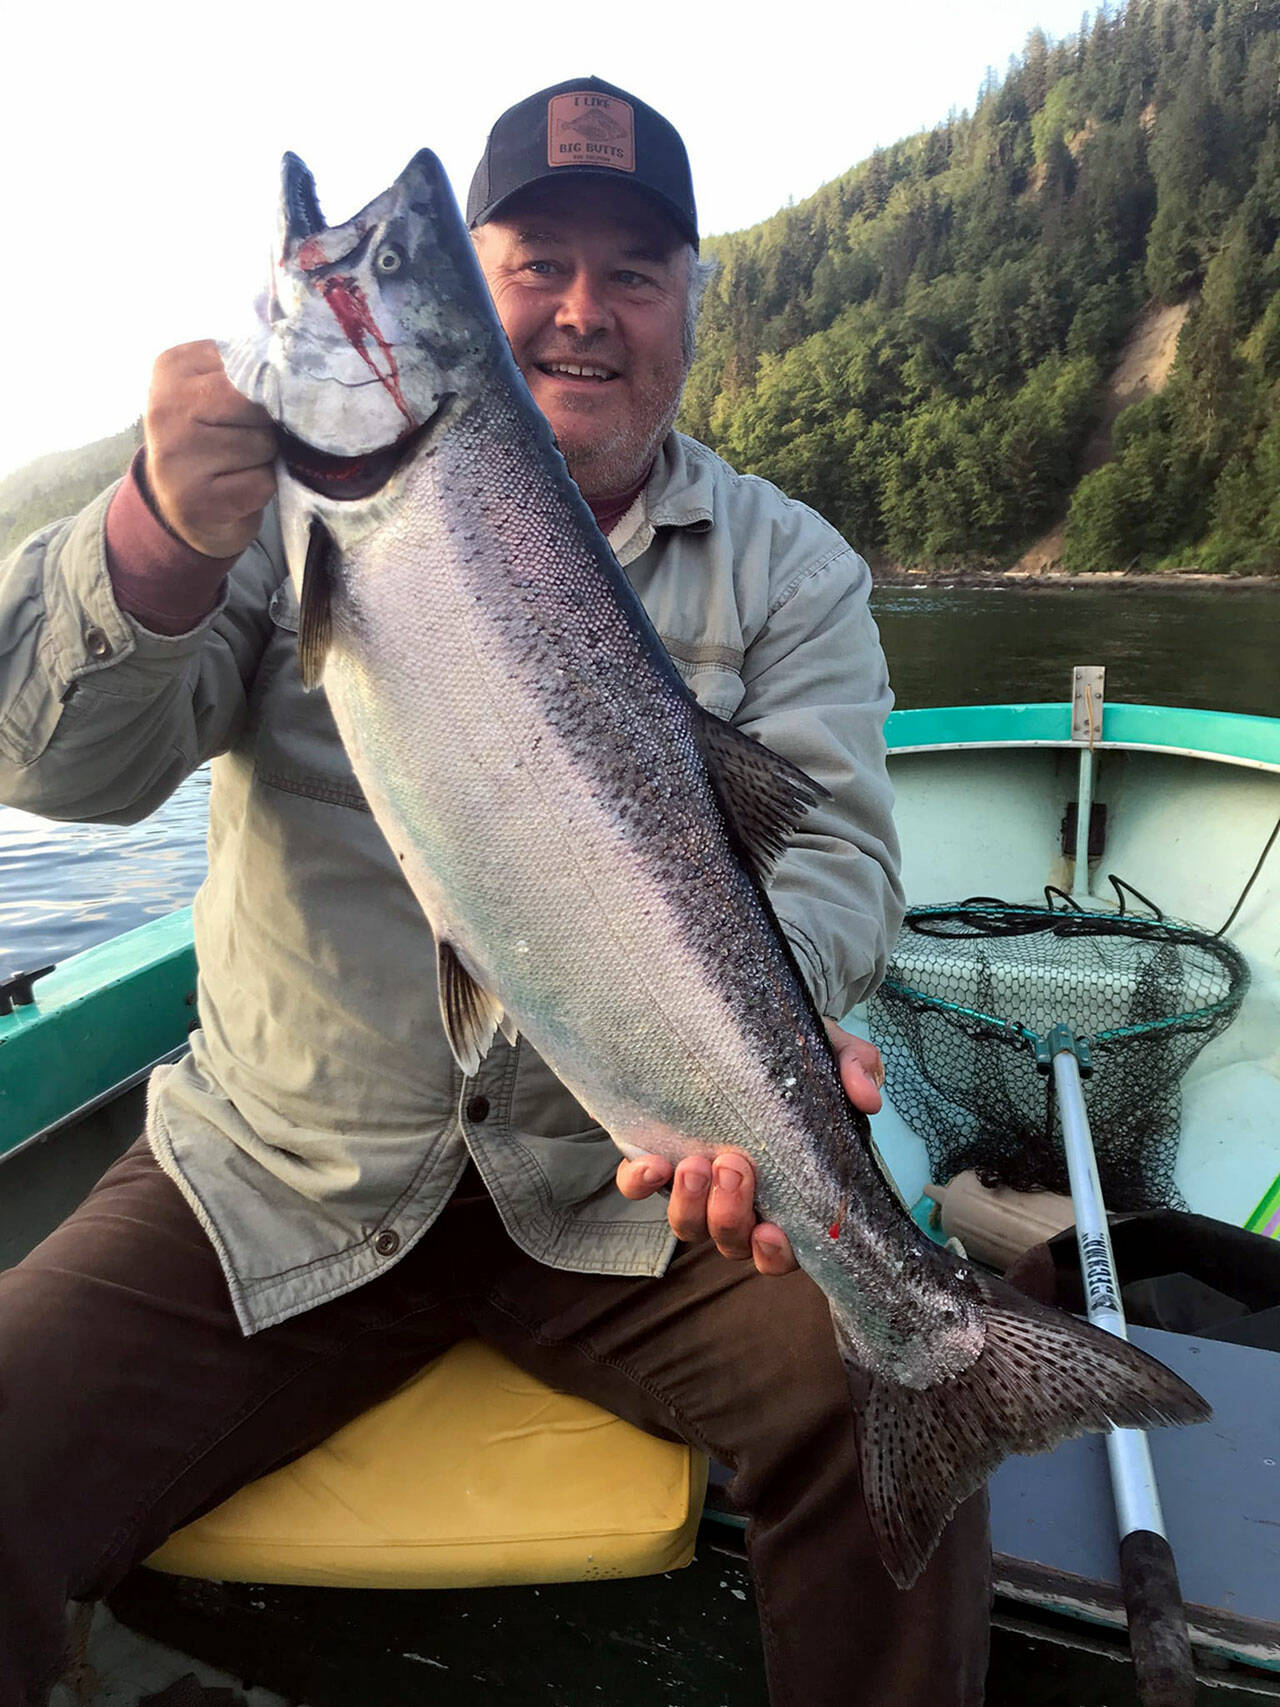 Steve Hazard of Angler’s Hideaway in Sekiu caught this good-sized hatchery chinook Wednesday morning while fishing with good friend Morris Bond, age 83, in the Turquoise Avenger.